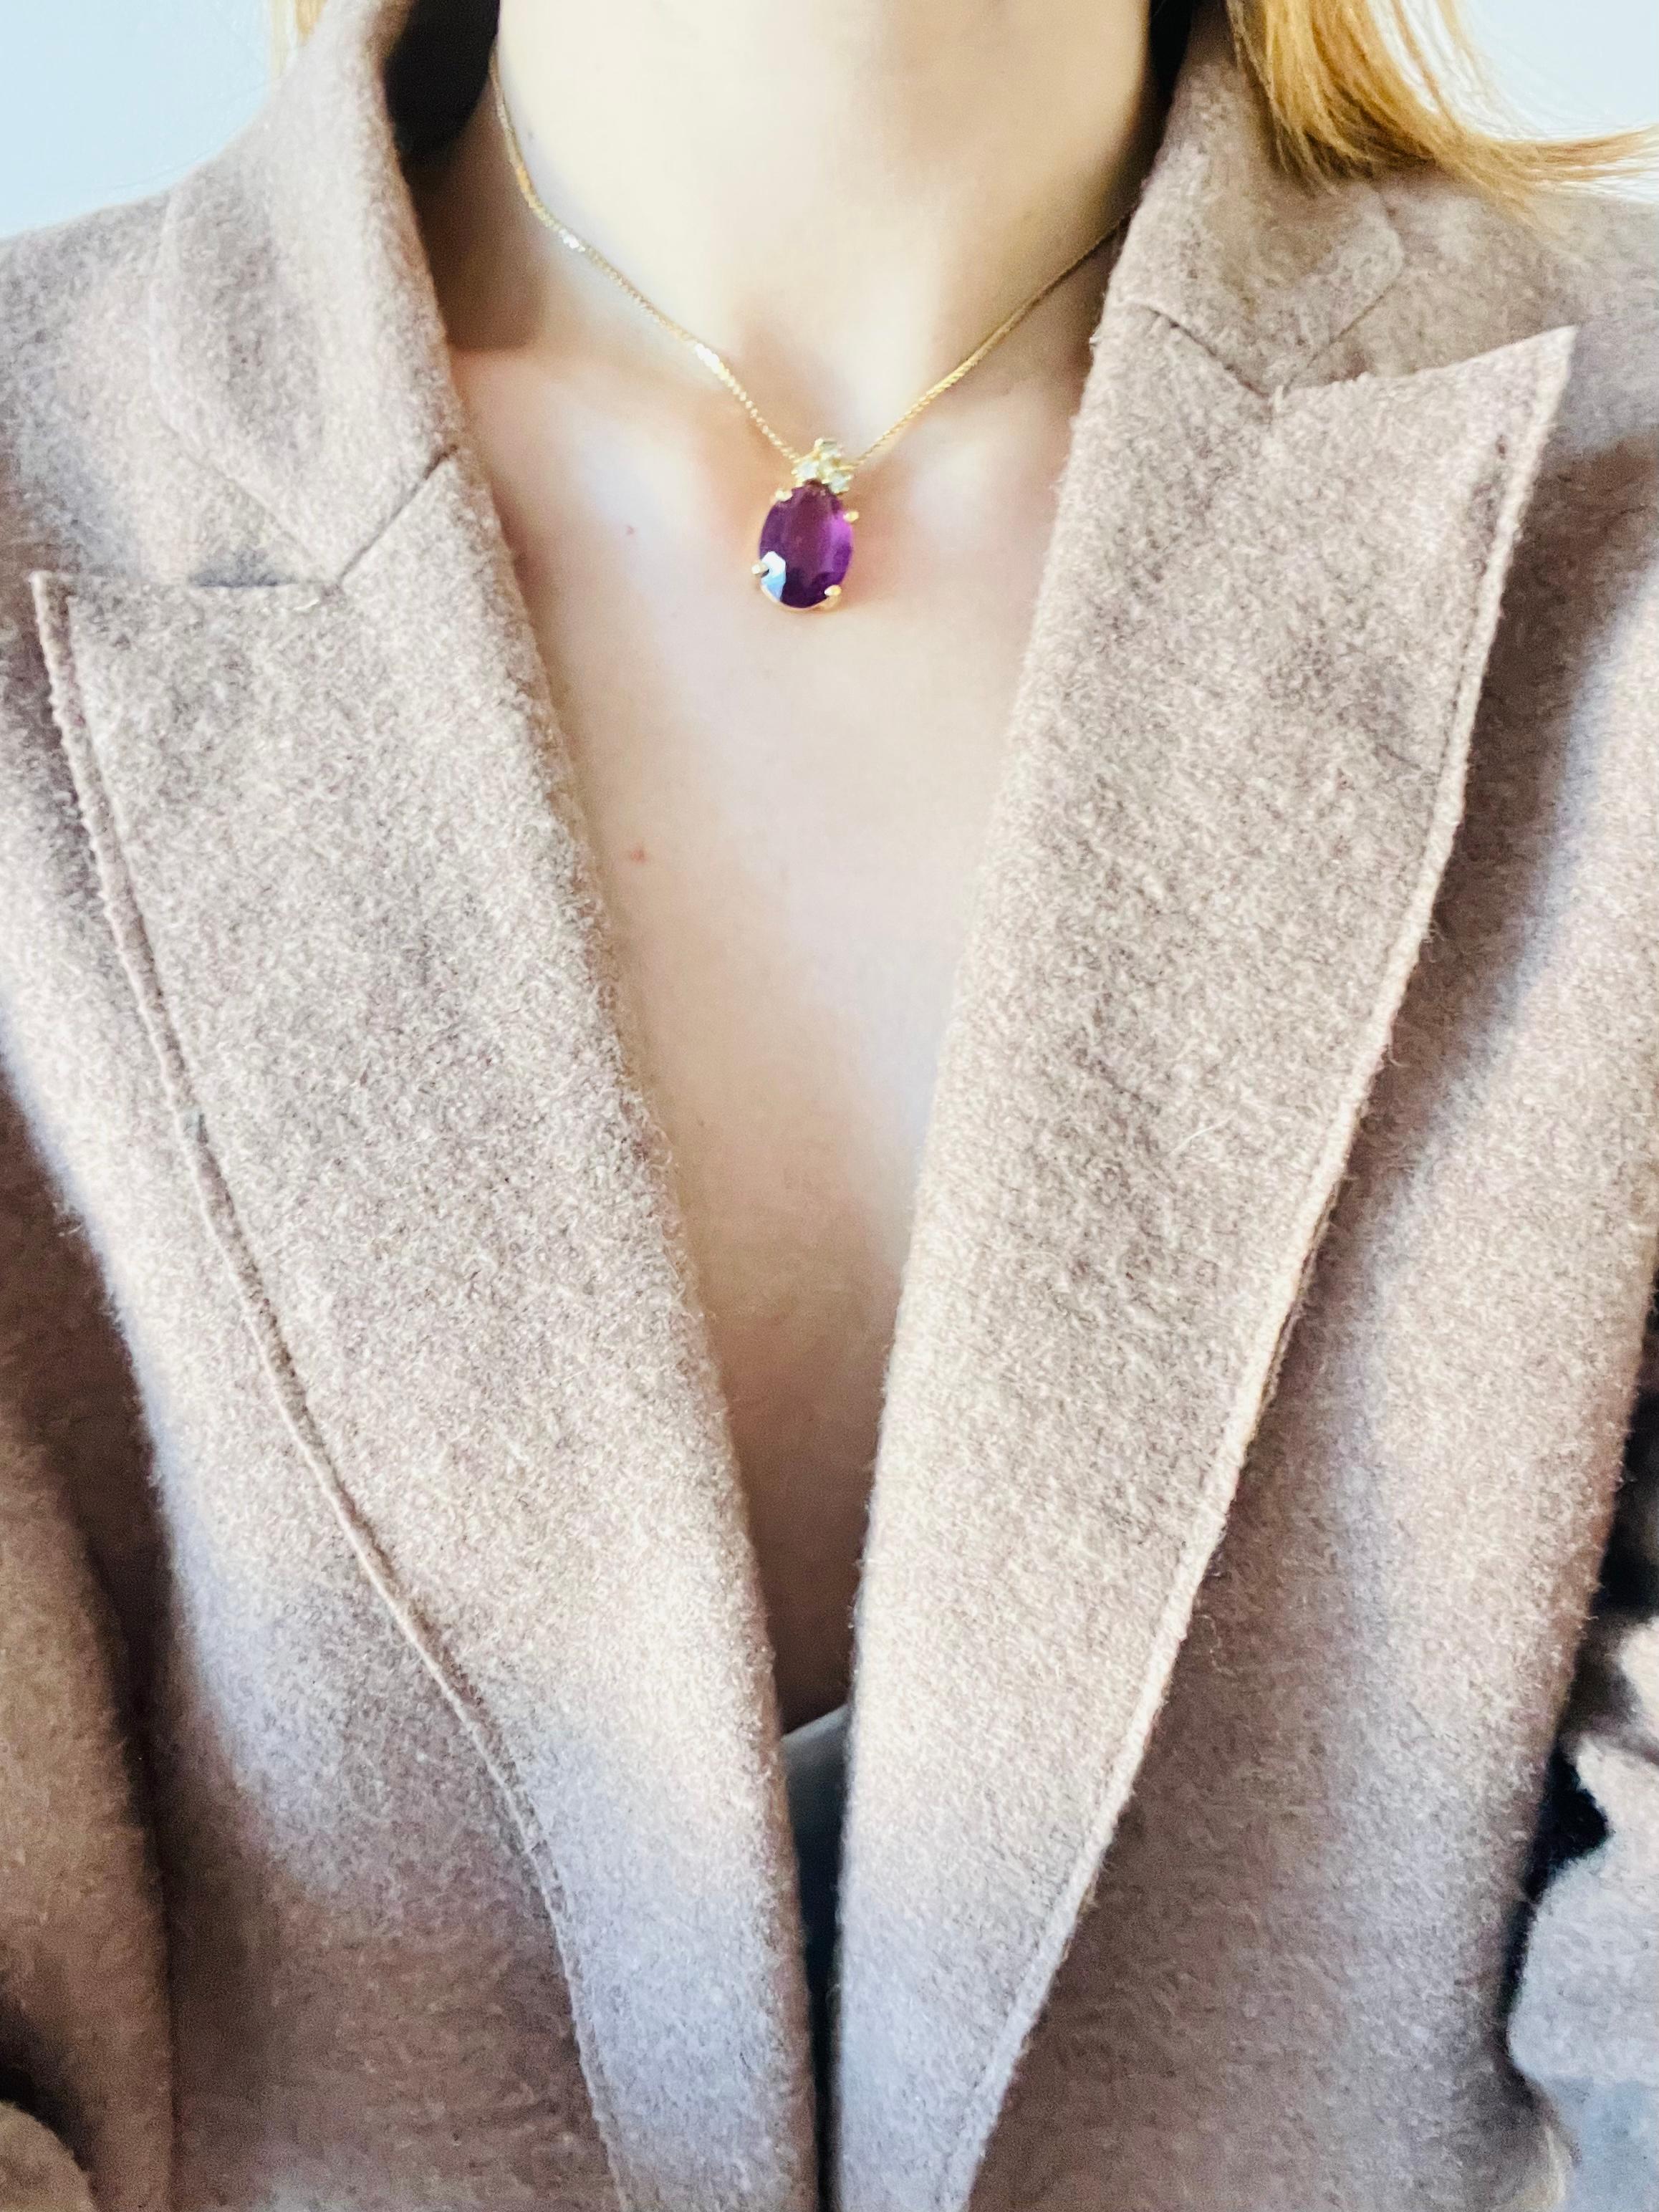 Christian Dior Vintage 1980s Amethyst Purple Oval Crystals Gold Pendant Necklace In Excellent Condition For Sale In Wokingham, England